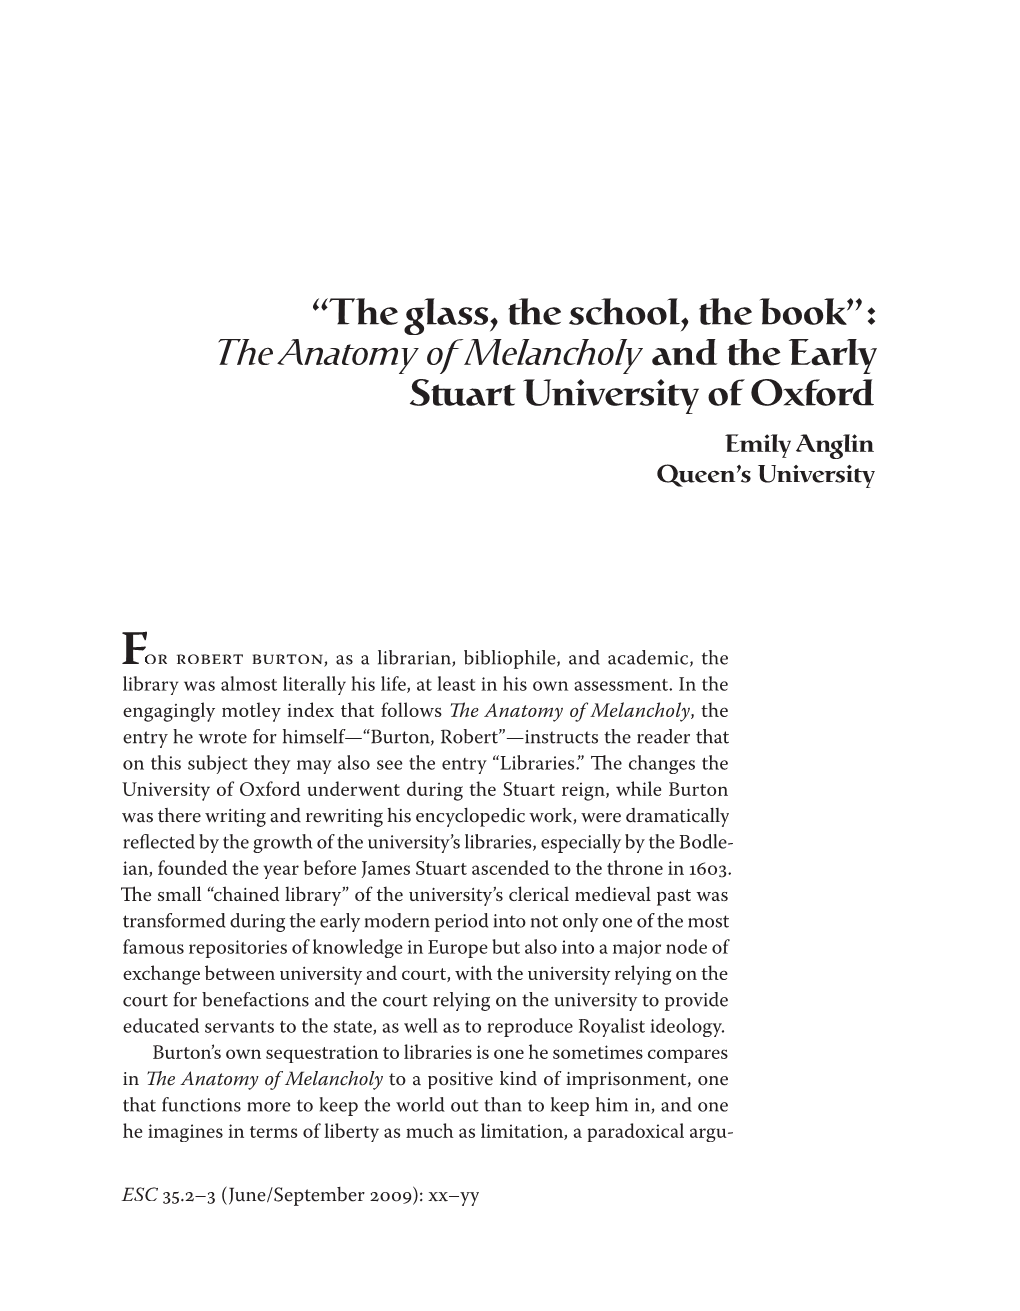 “The Glass, the School, the Book”: the Anatomy of Melancholy and the Eearlyarly Stuart University of Oxford Emily Anglin Queen’S University